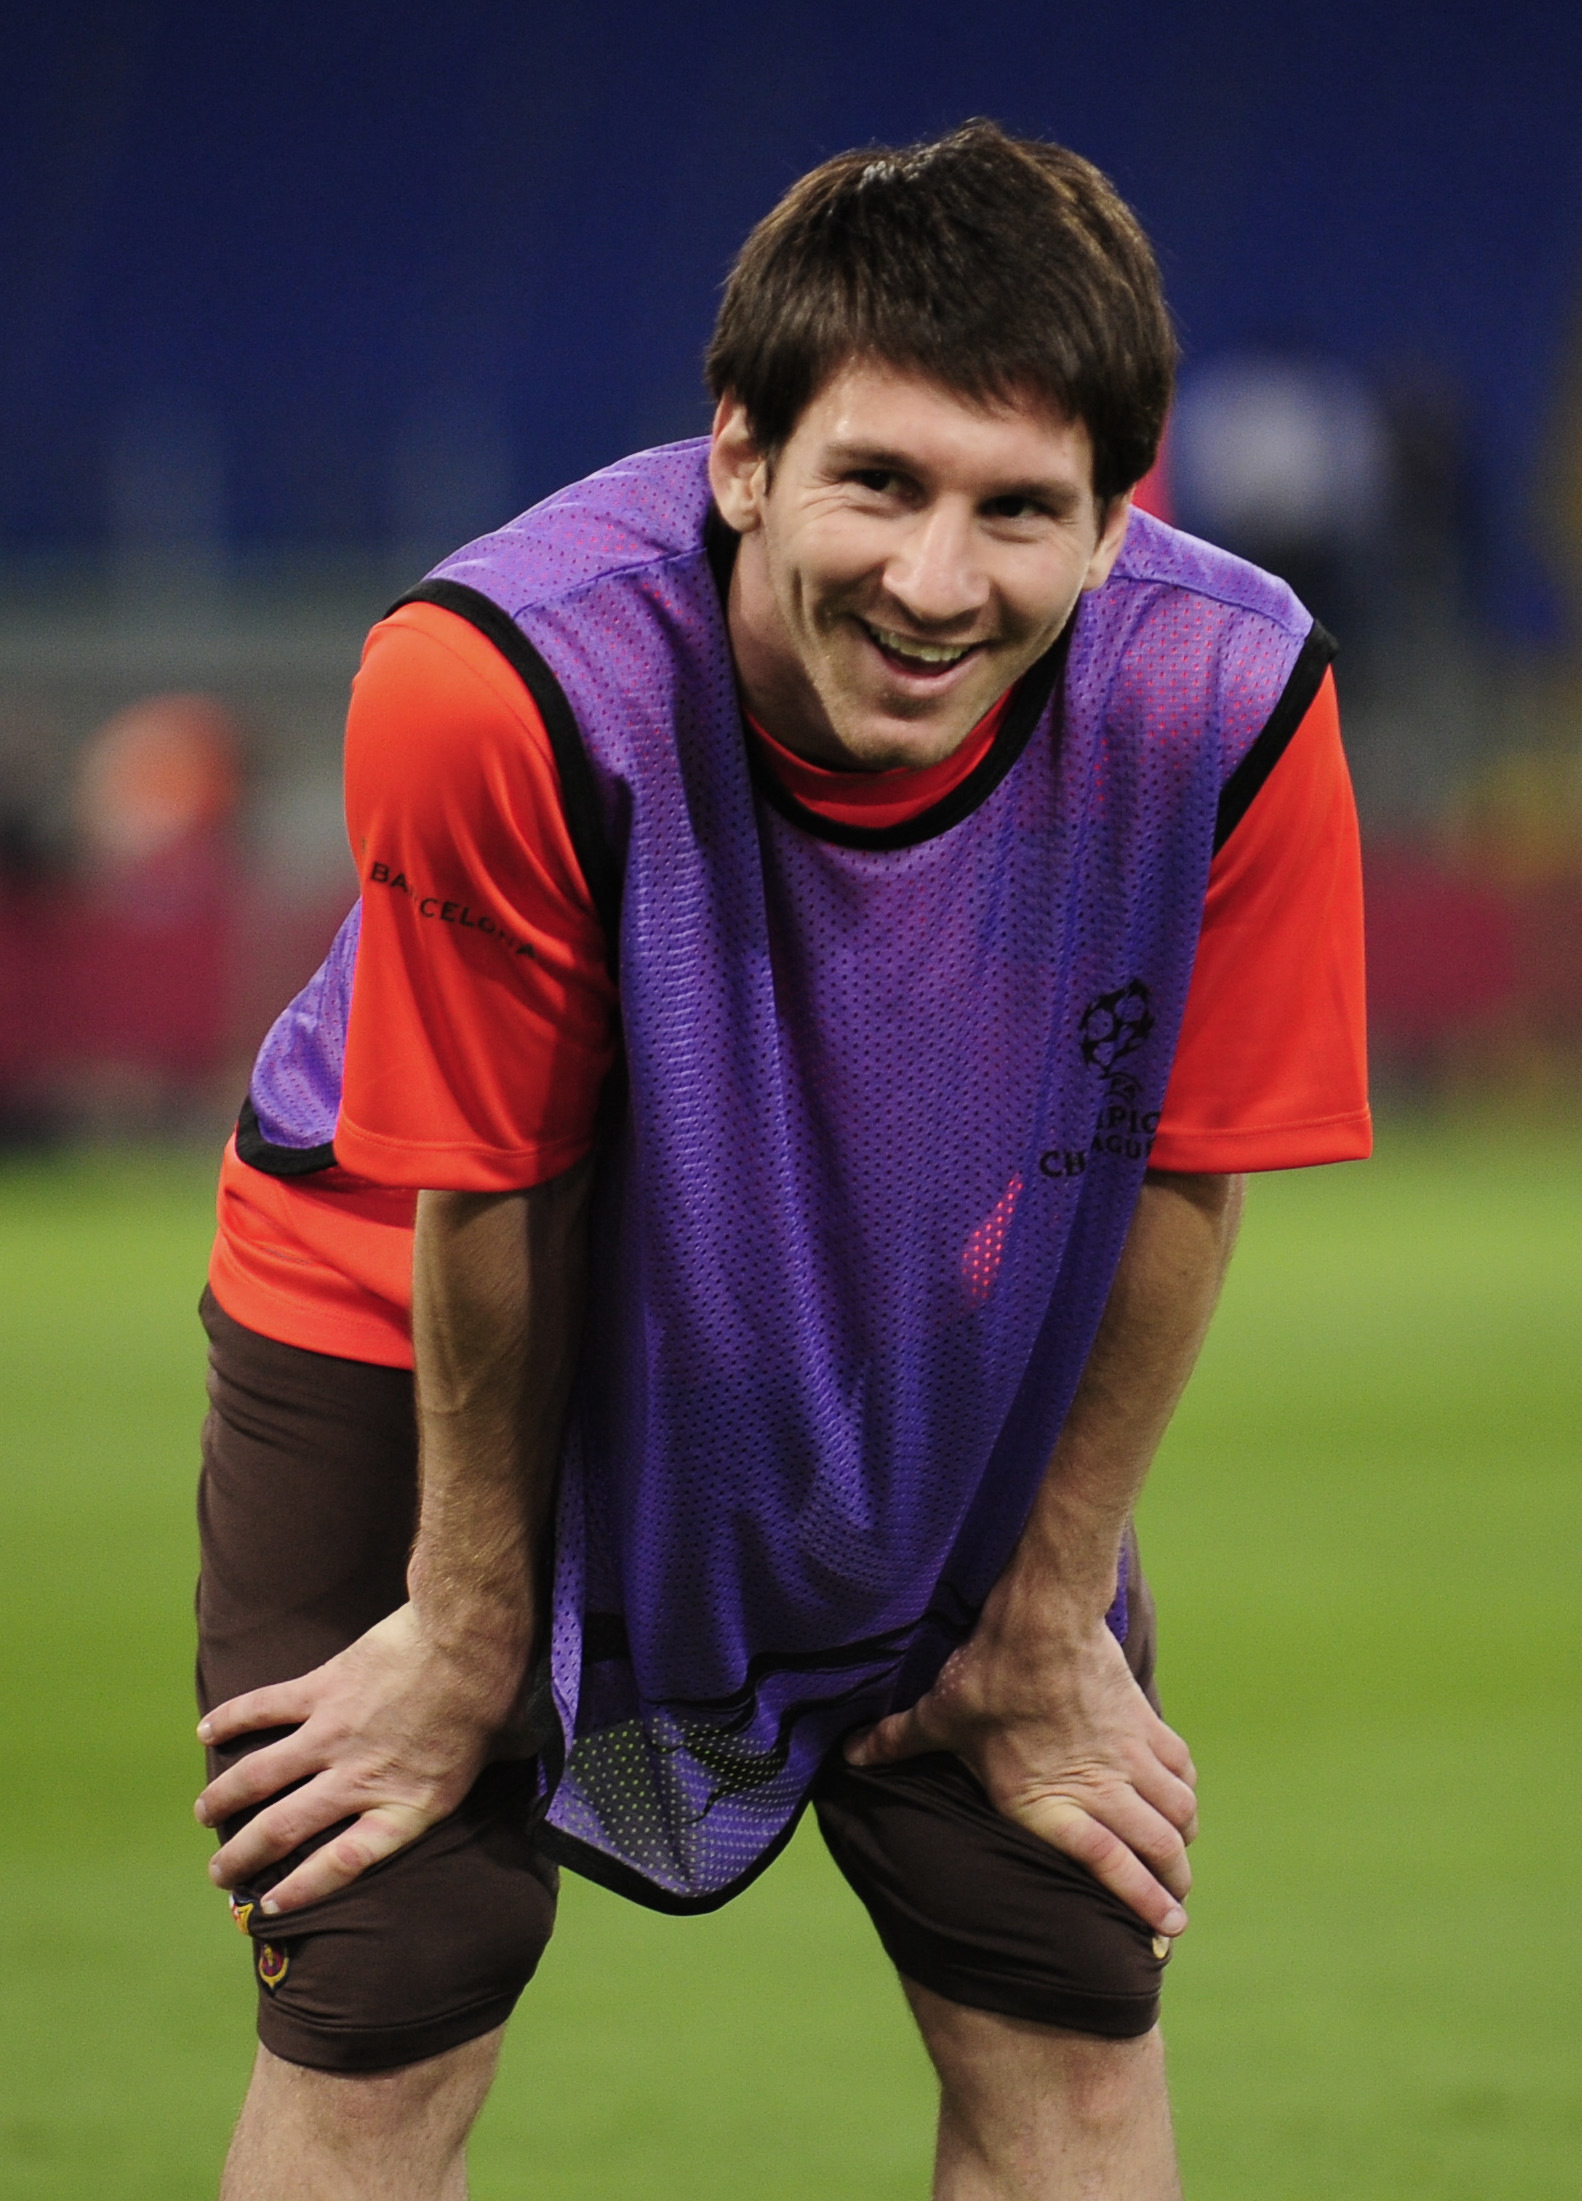 Lionel Messi photo 6 of 22 pics, wallpaper - photo #445809 - ThePlace2